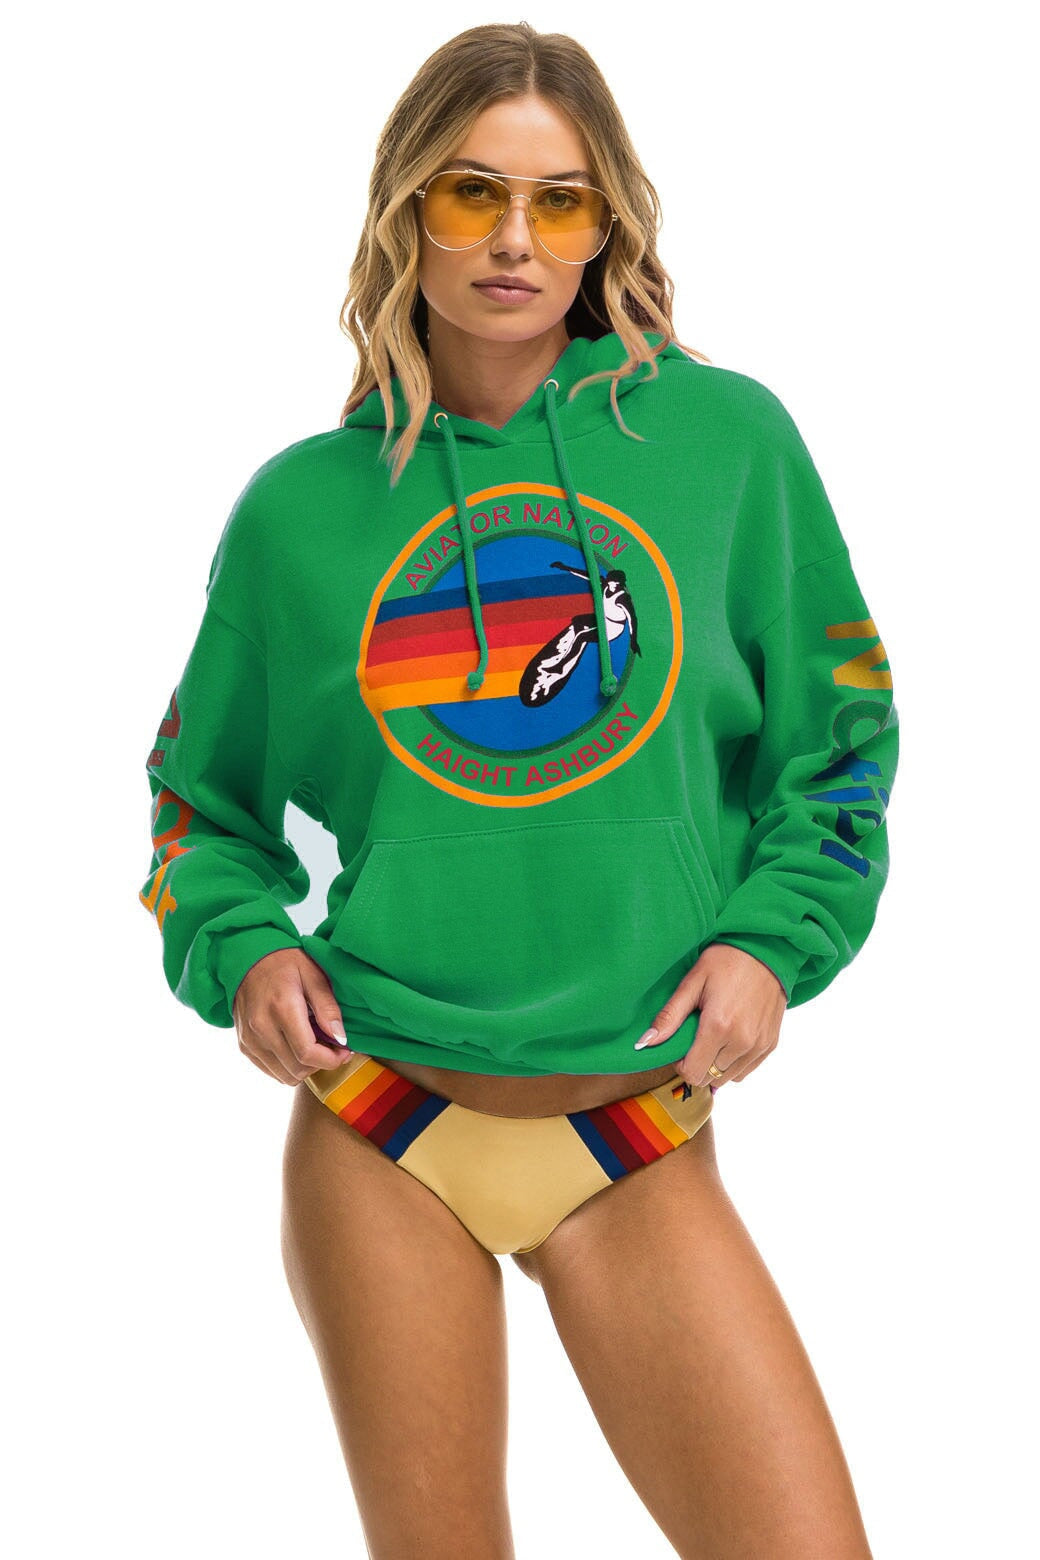 AVIATOR NATION HAIGHT ASHBURY RELAXED PULLOVER HOODIE - KELLY GREEN Hoodie Aviator Nation 